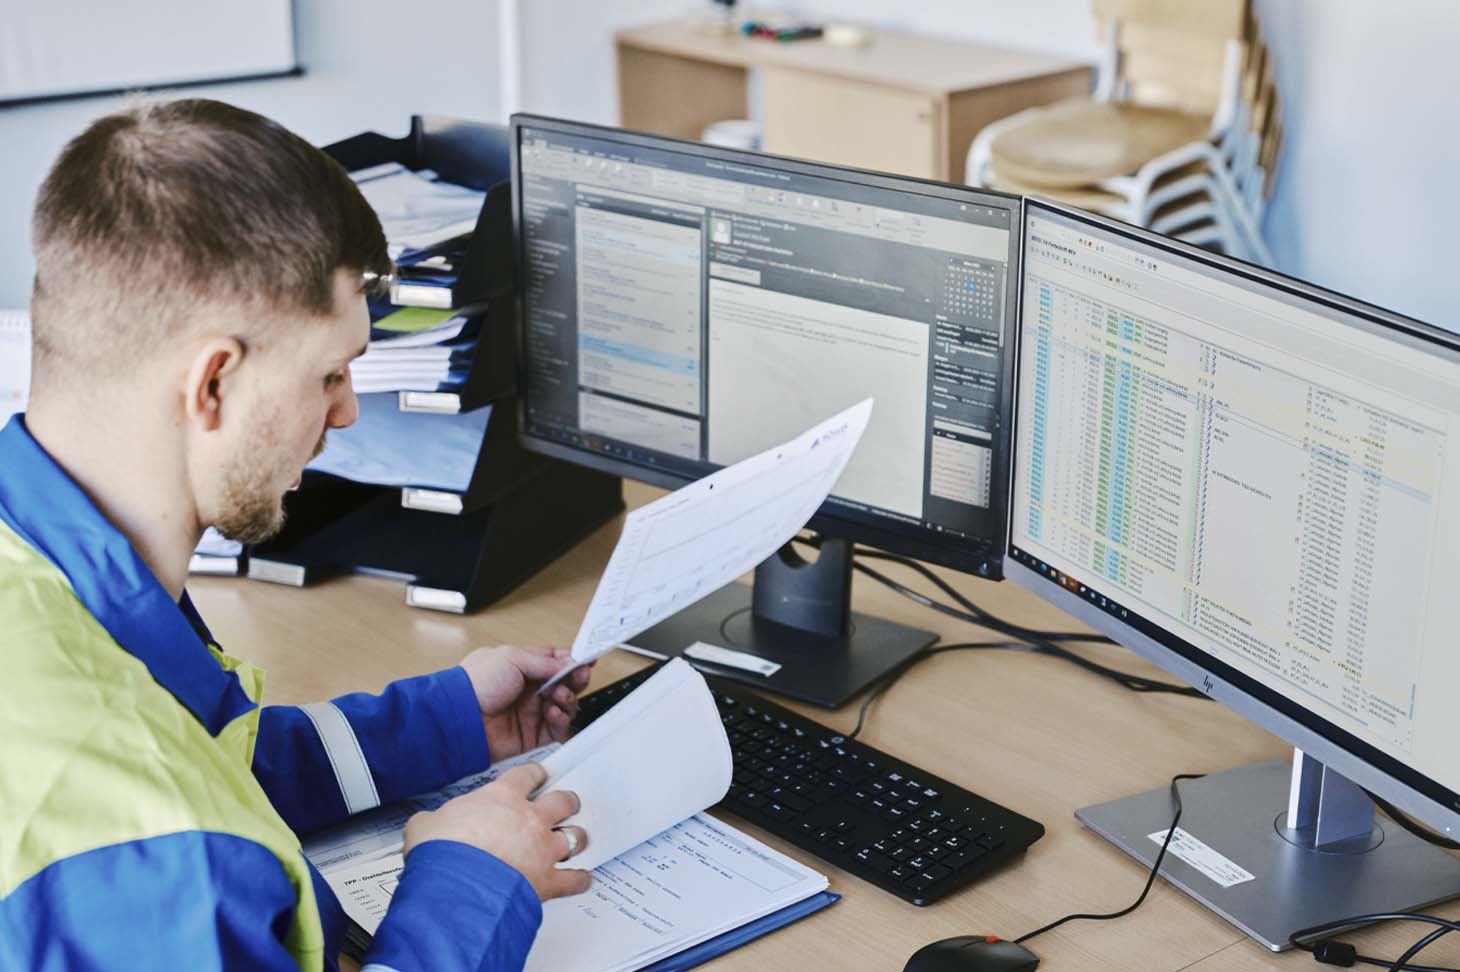 voestalpine employee Thomas working at his desk in front of two screens with a folder